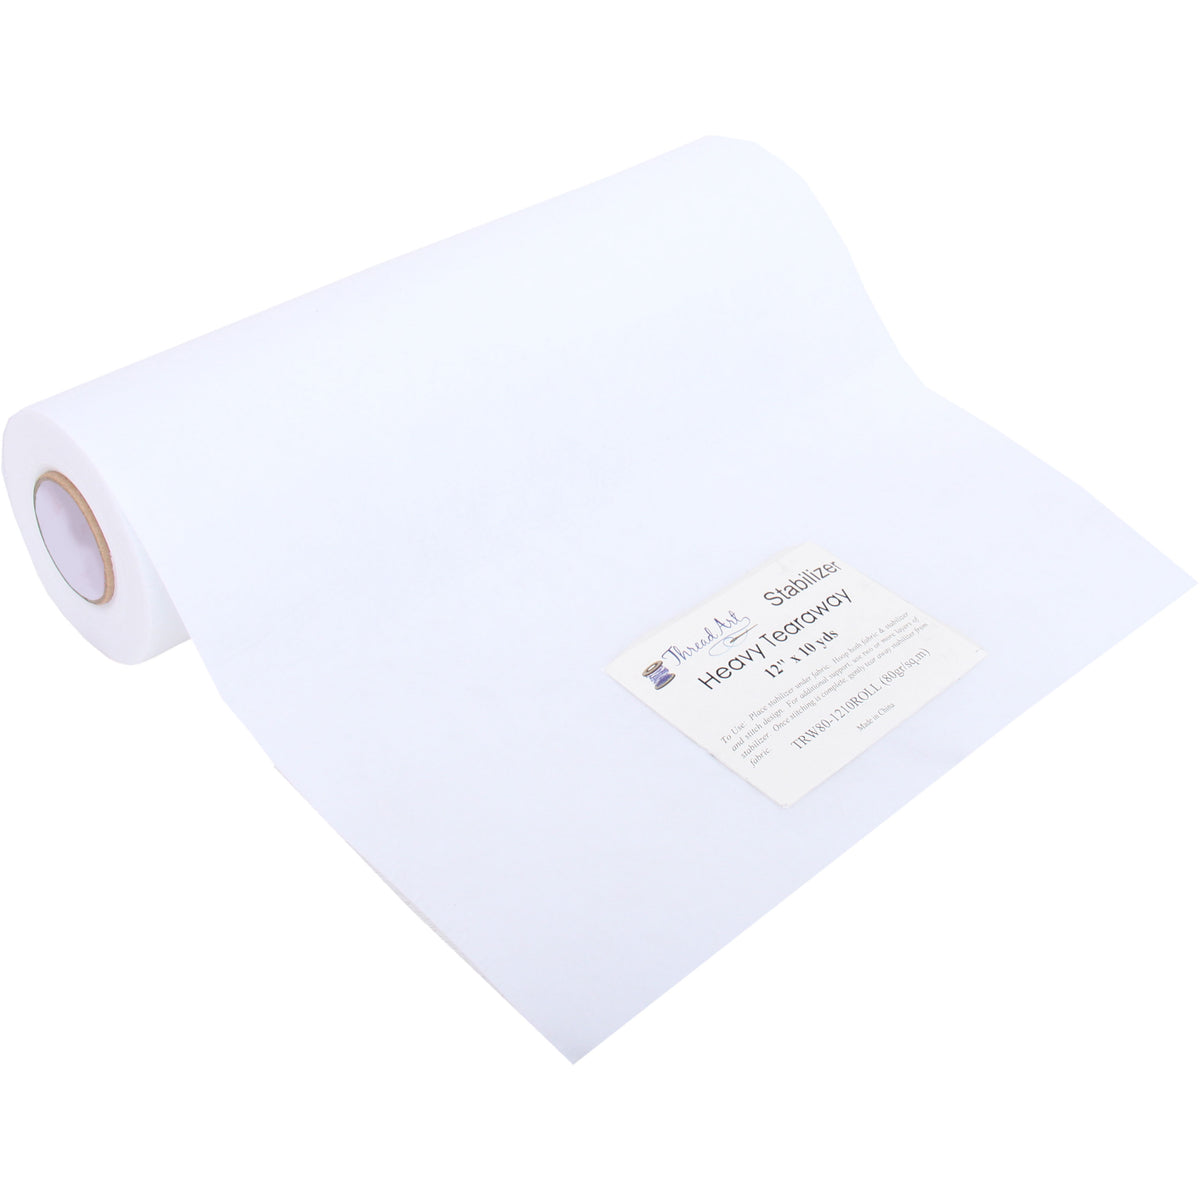  Tear Away Stabilizer for Embroidery Backing 10x12